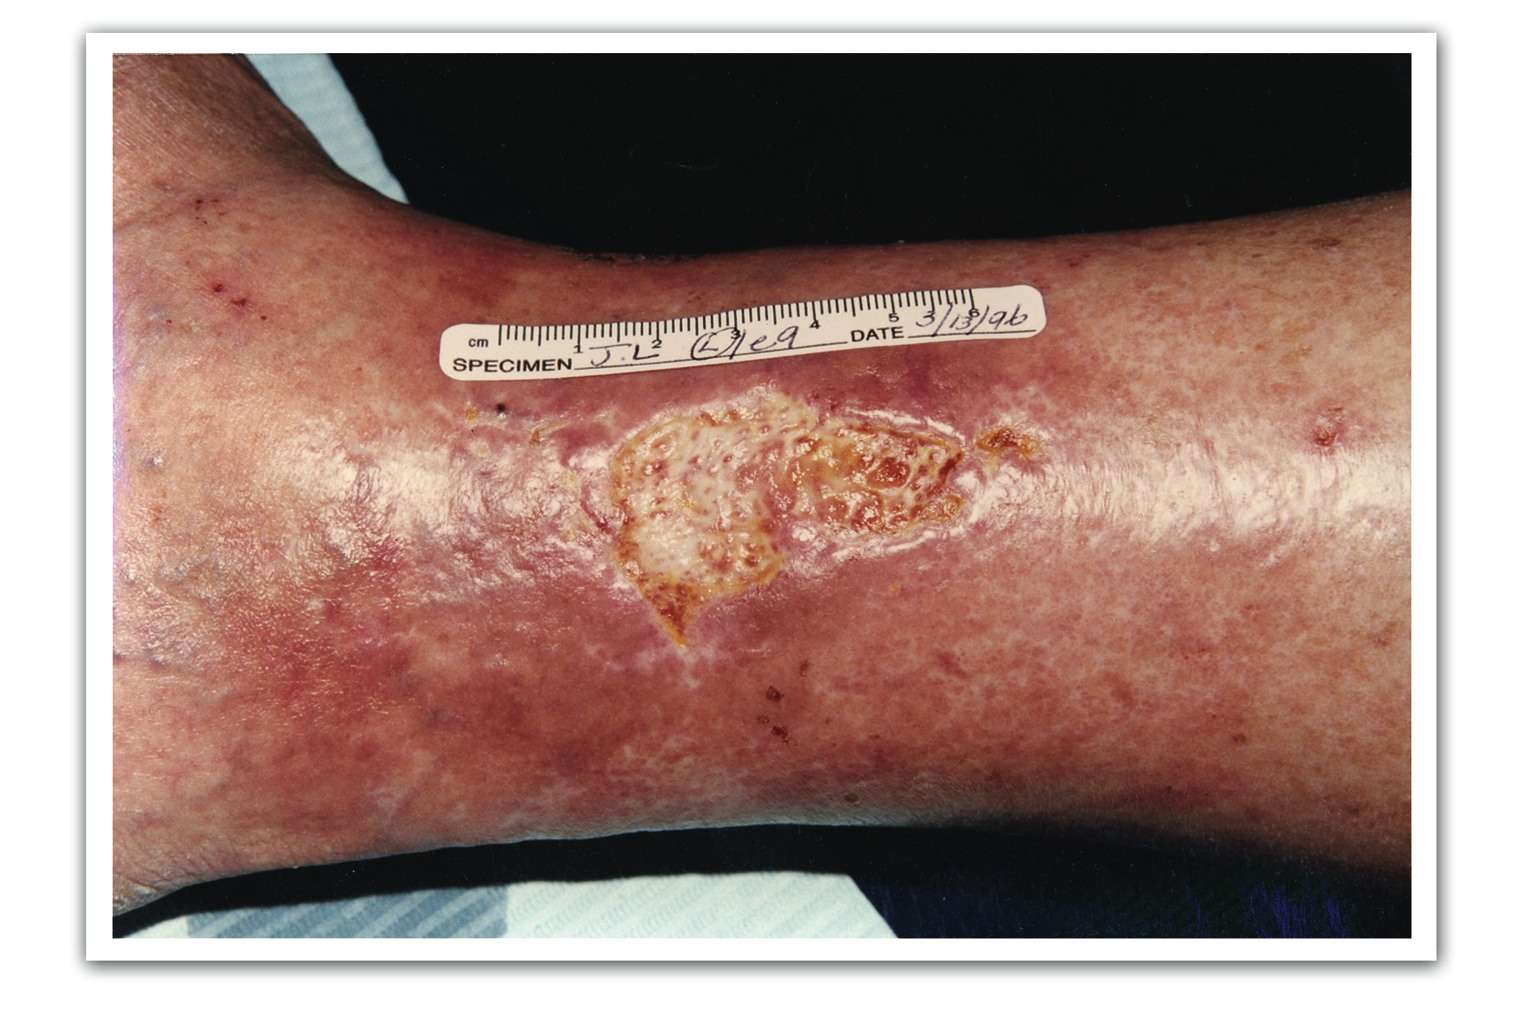 How To Manage Venous Stasis Ulcers